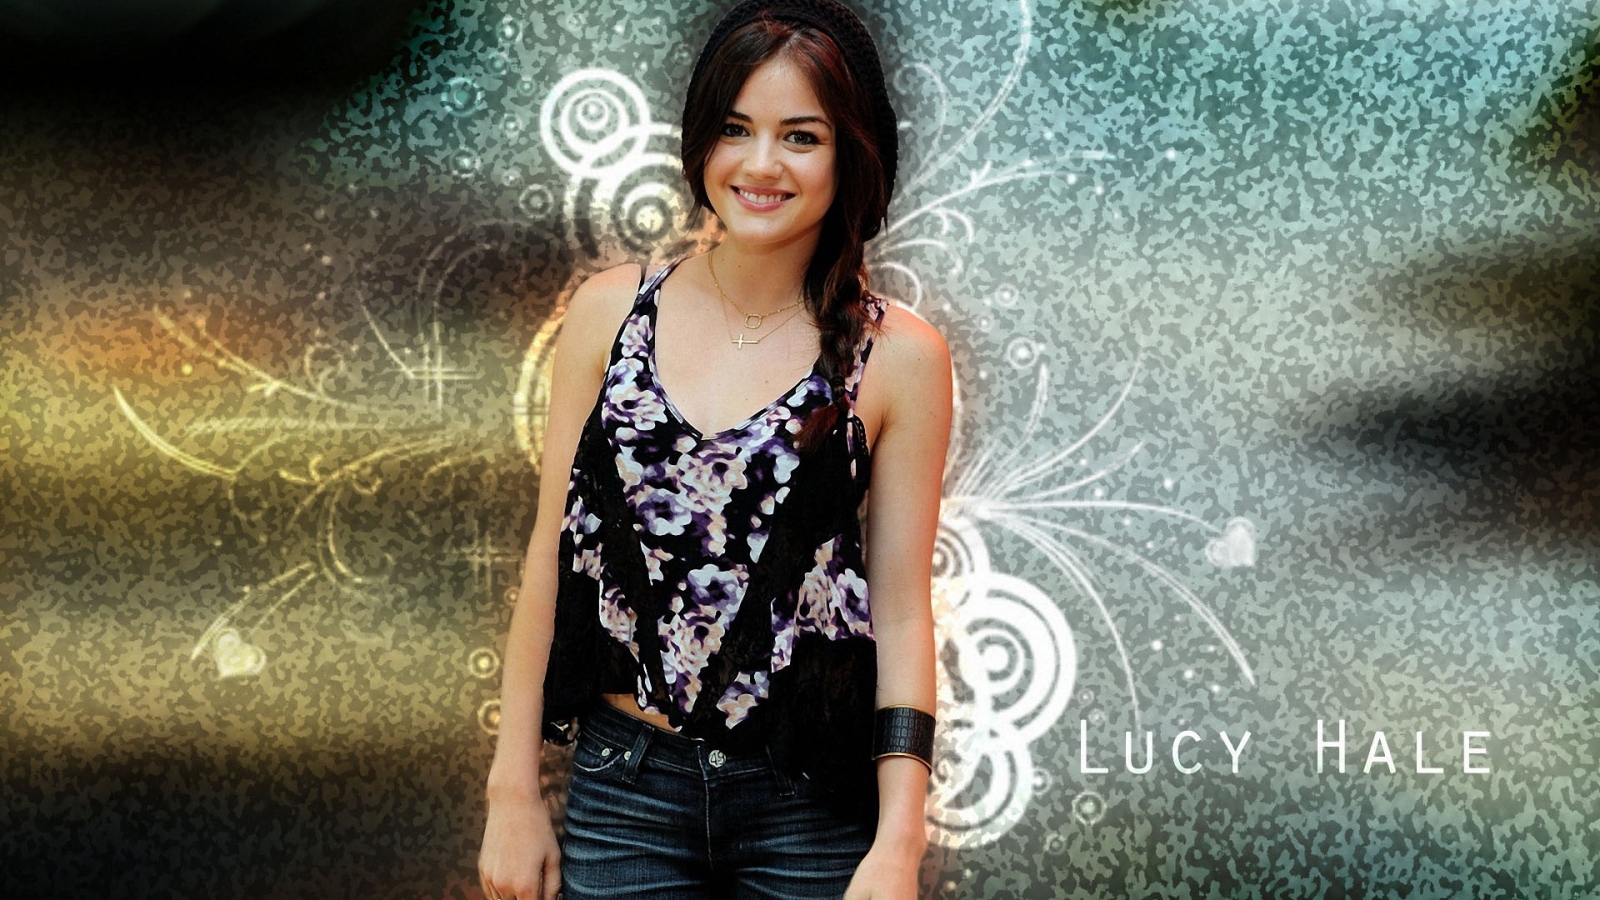 Beautiful Lucy Hale HD Image Wallpaper And Pictures